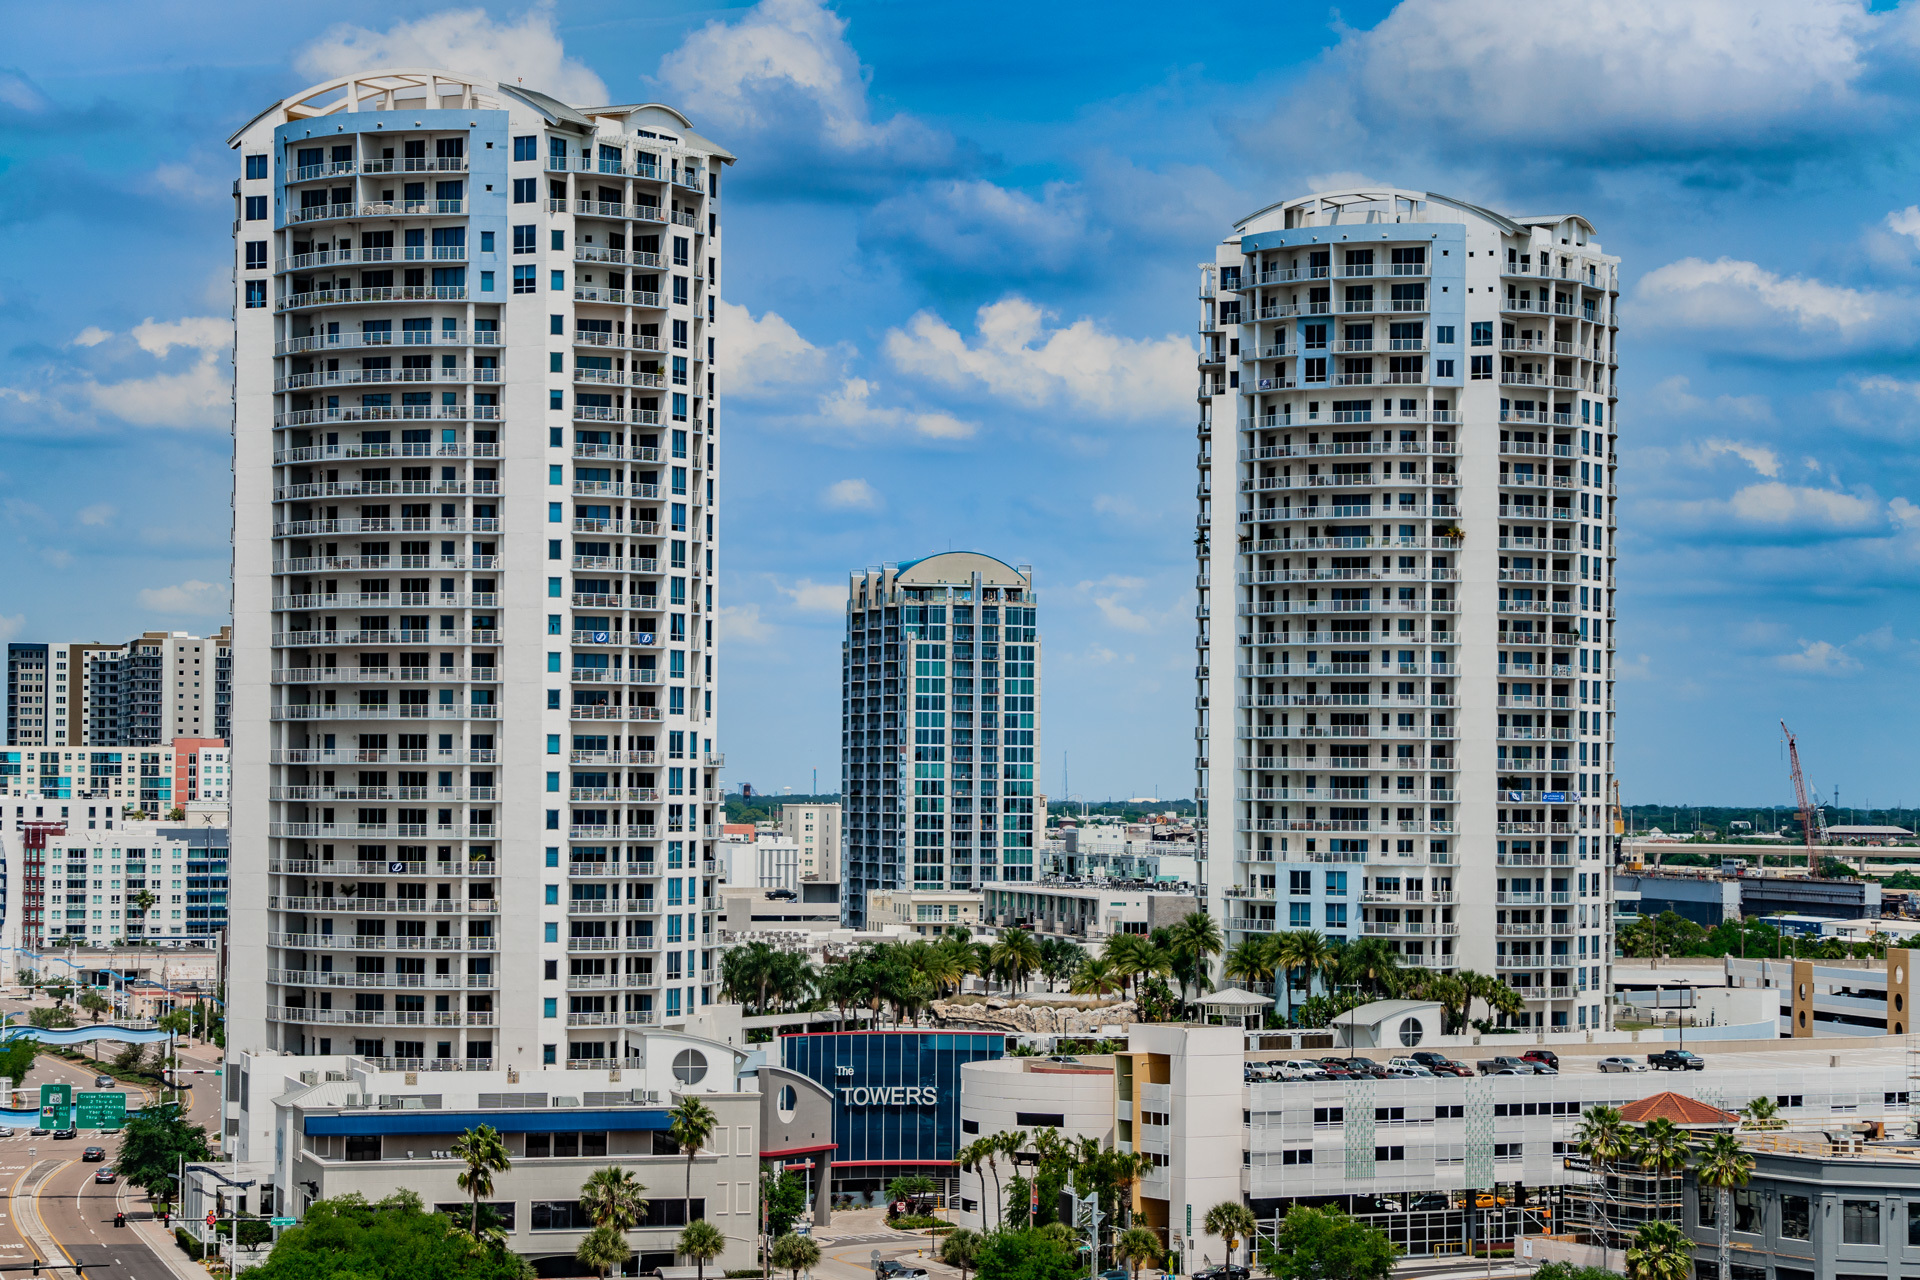 The Towers at Channelside, Channelside District, Florida Condos for Sale in Tampa